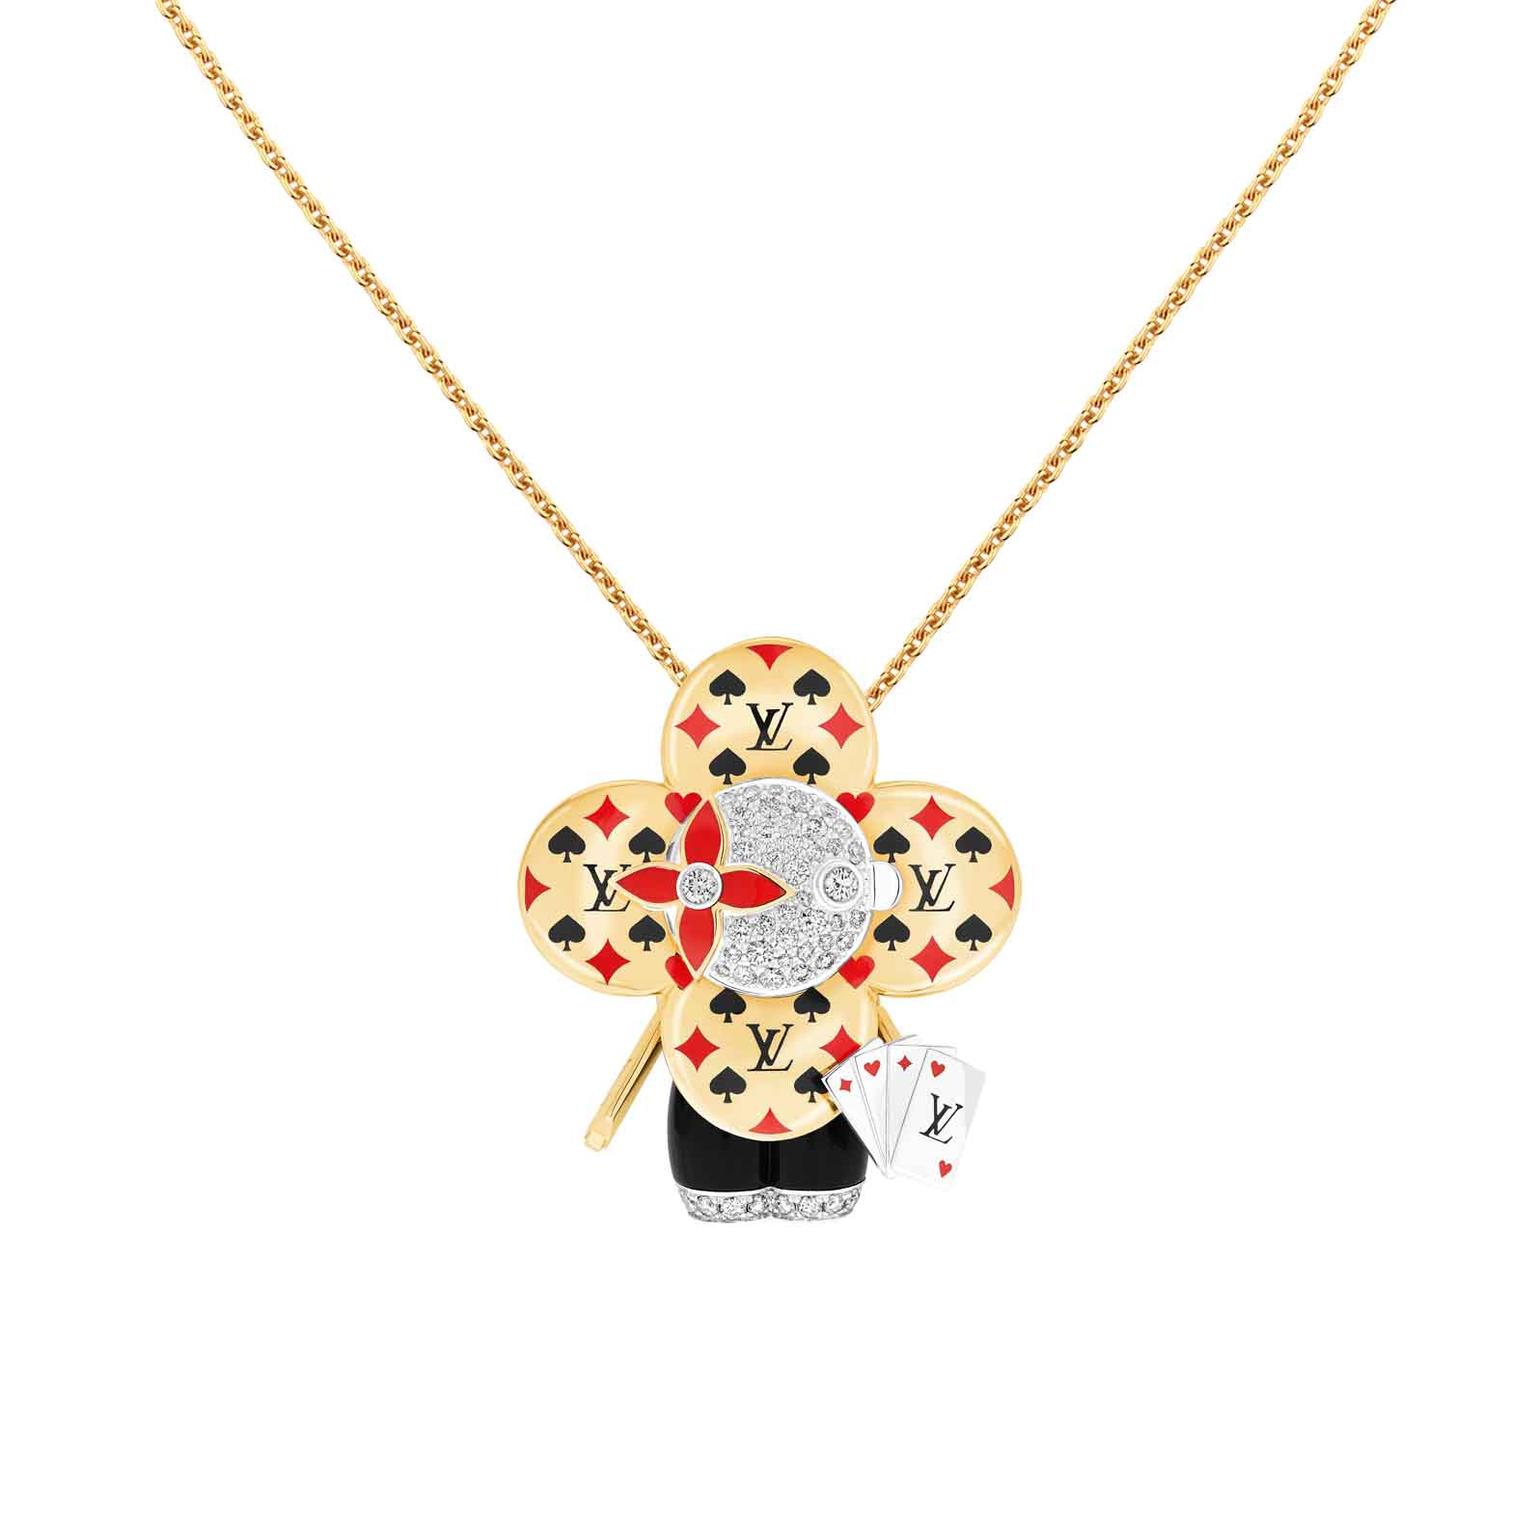 Louis Vuitton's mascot Vivienne expands into 11 new jewellery creations -  The Glass Magazine